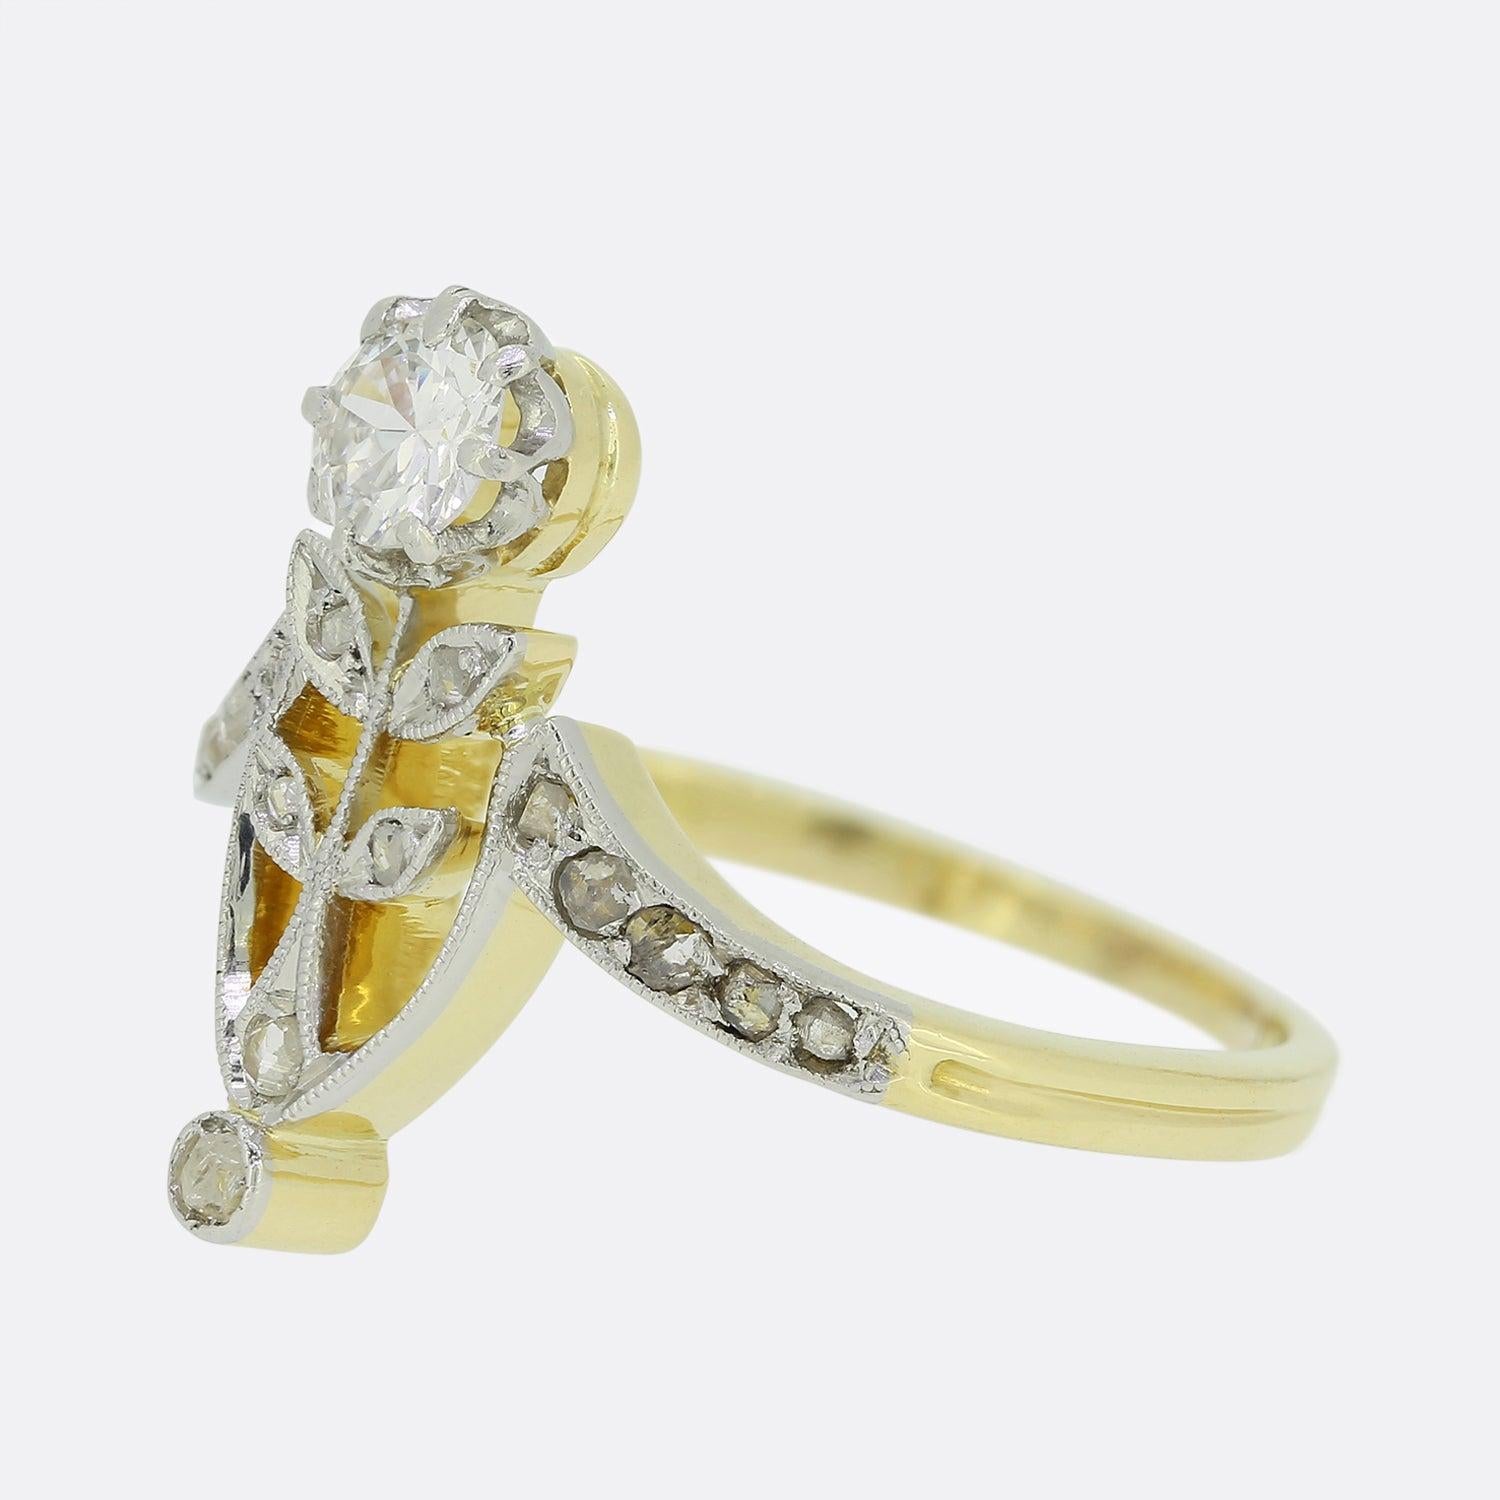 Here we have an elegant 18ct yellow gold diamond ring. This Edwardian piece has been crafted into the shape of a flower with a 0.25ct brilliant cut diamond acting as the head. Fine platinum milgrain detailing distinguishes the rose cut diamond set